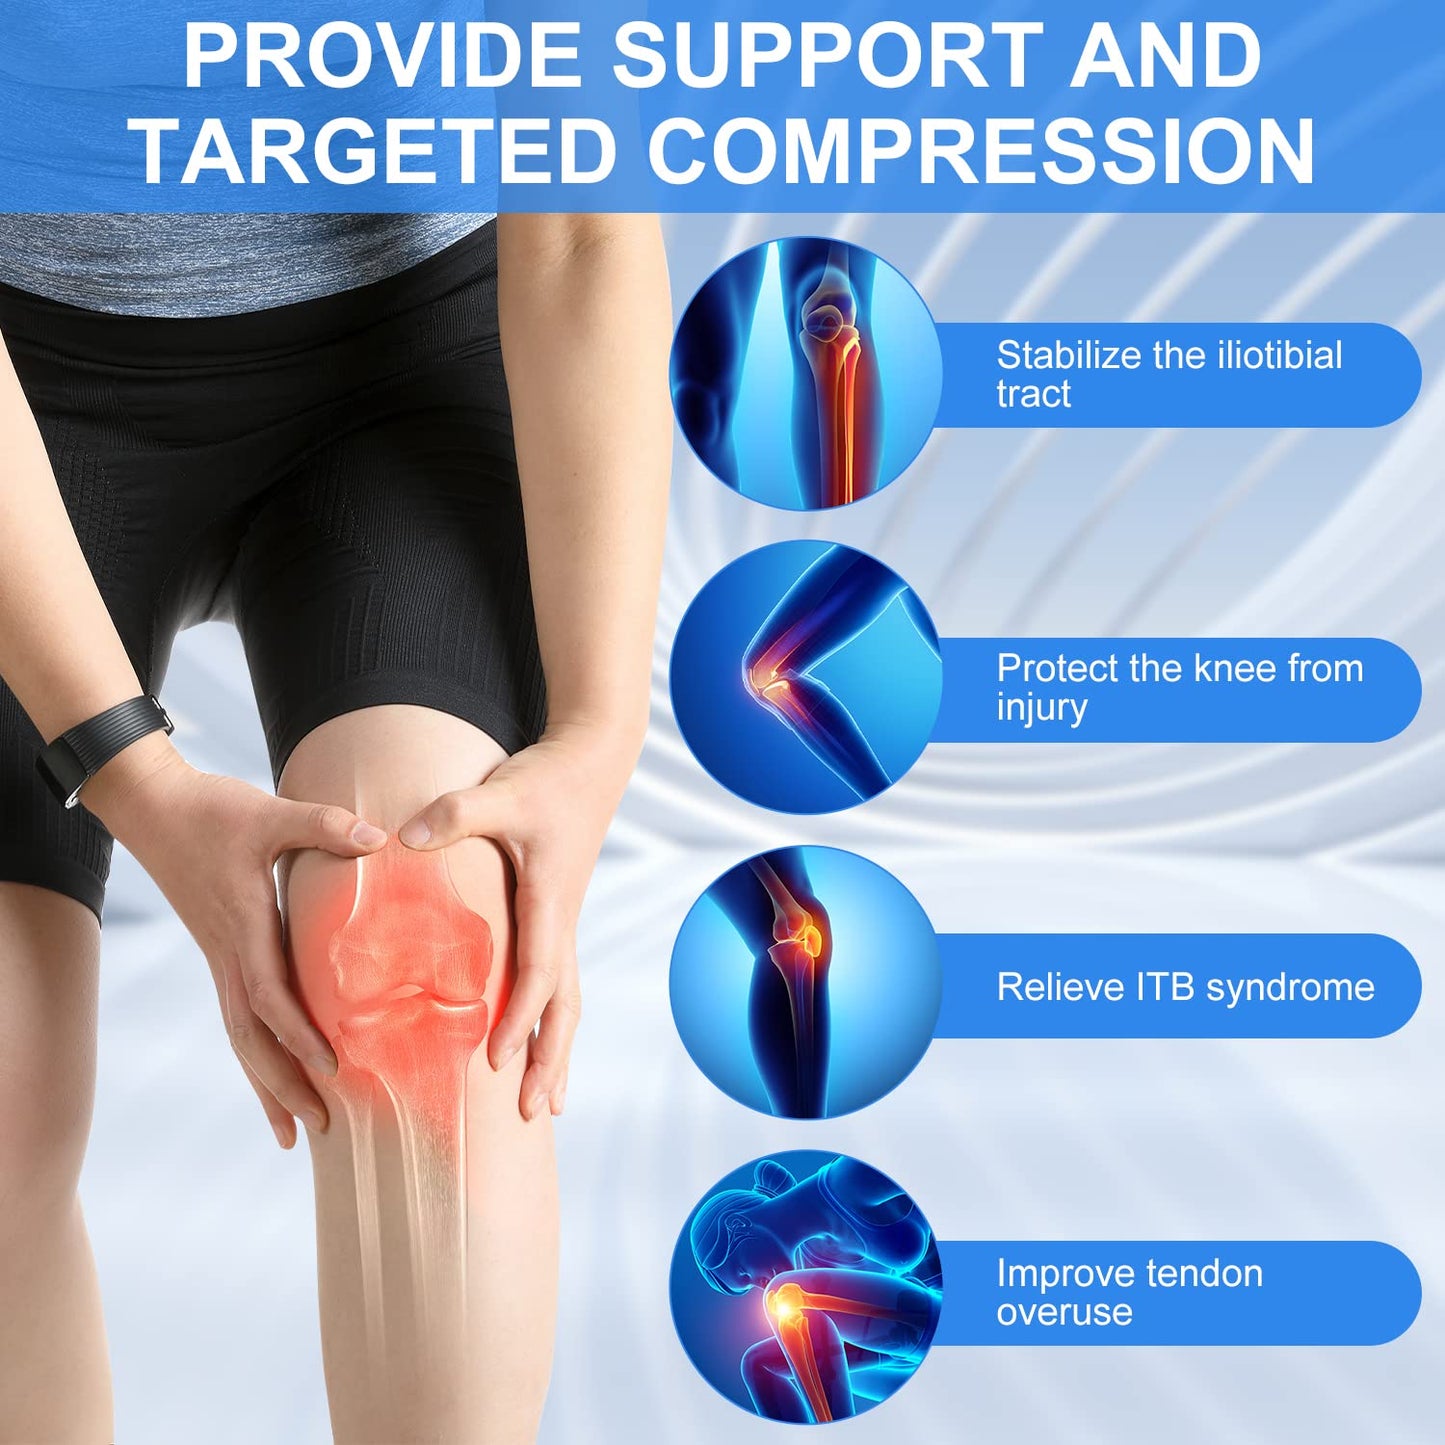 Do You Have Unexplained Knee Pain? Maybe You Have ITBS! by Kristin